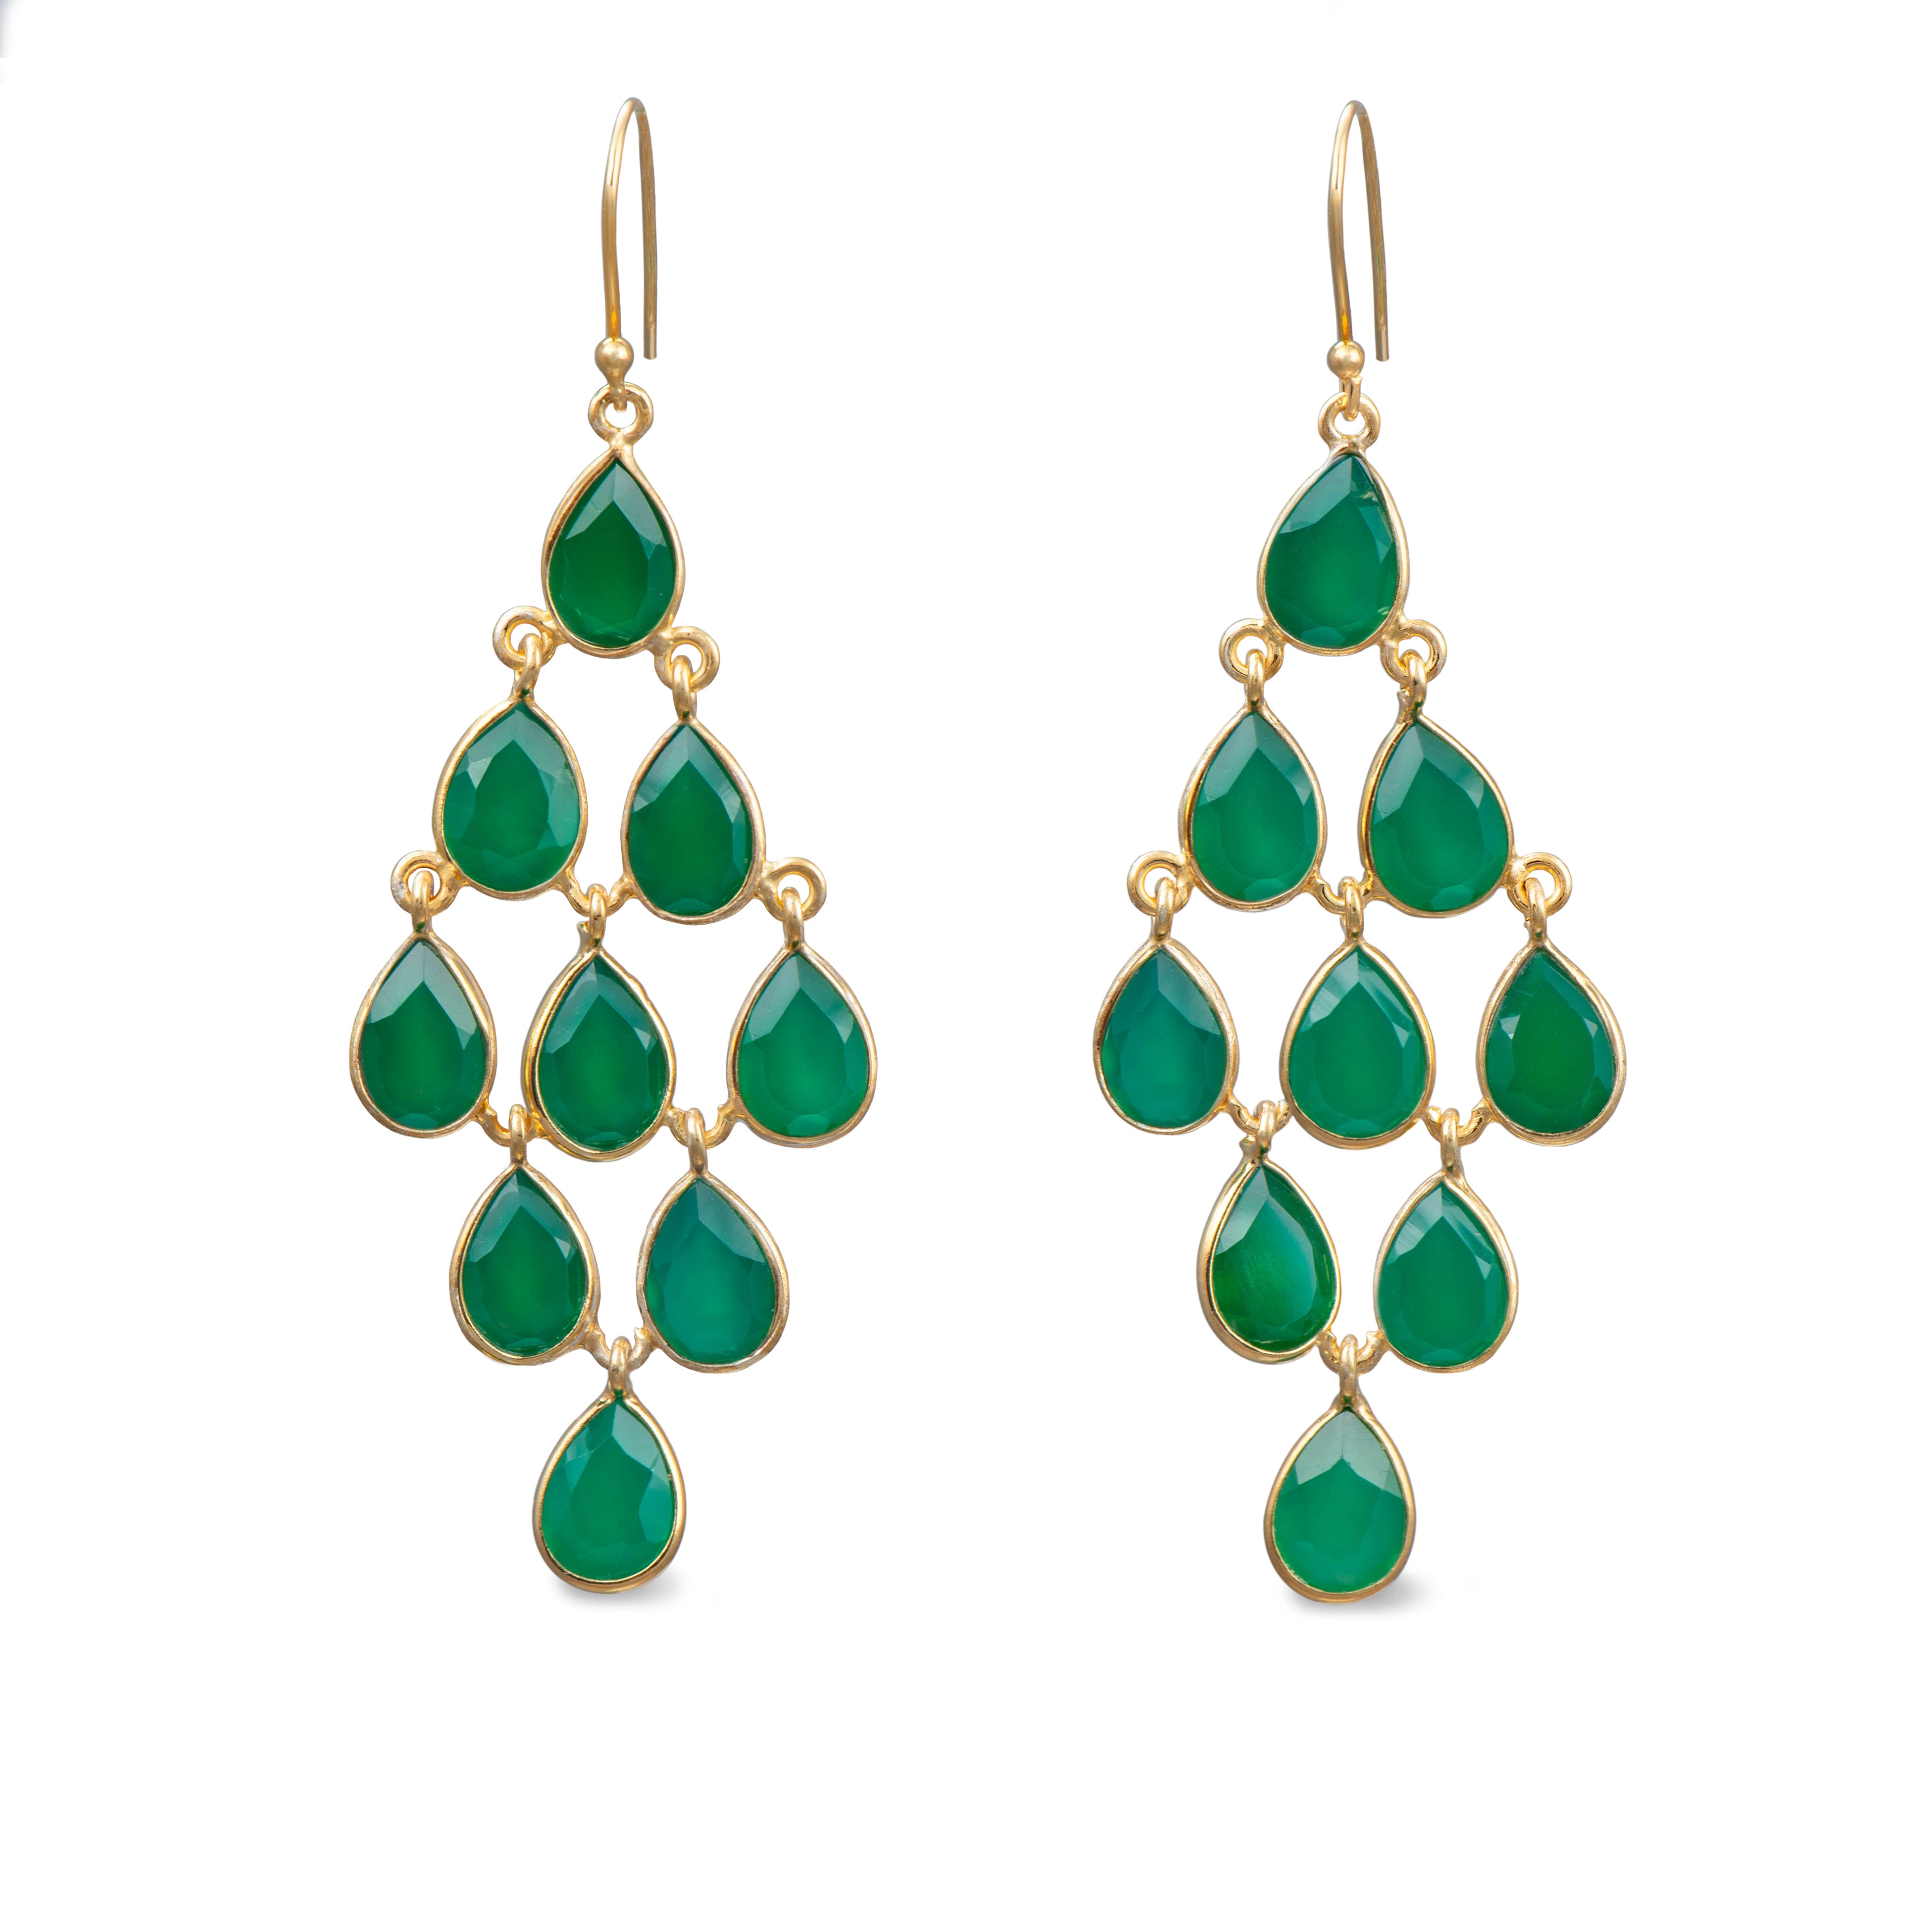 Gold Plated Sterling Silver Chandelier Earrings with Natural Gemstones - Green Onyx